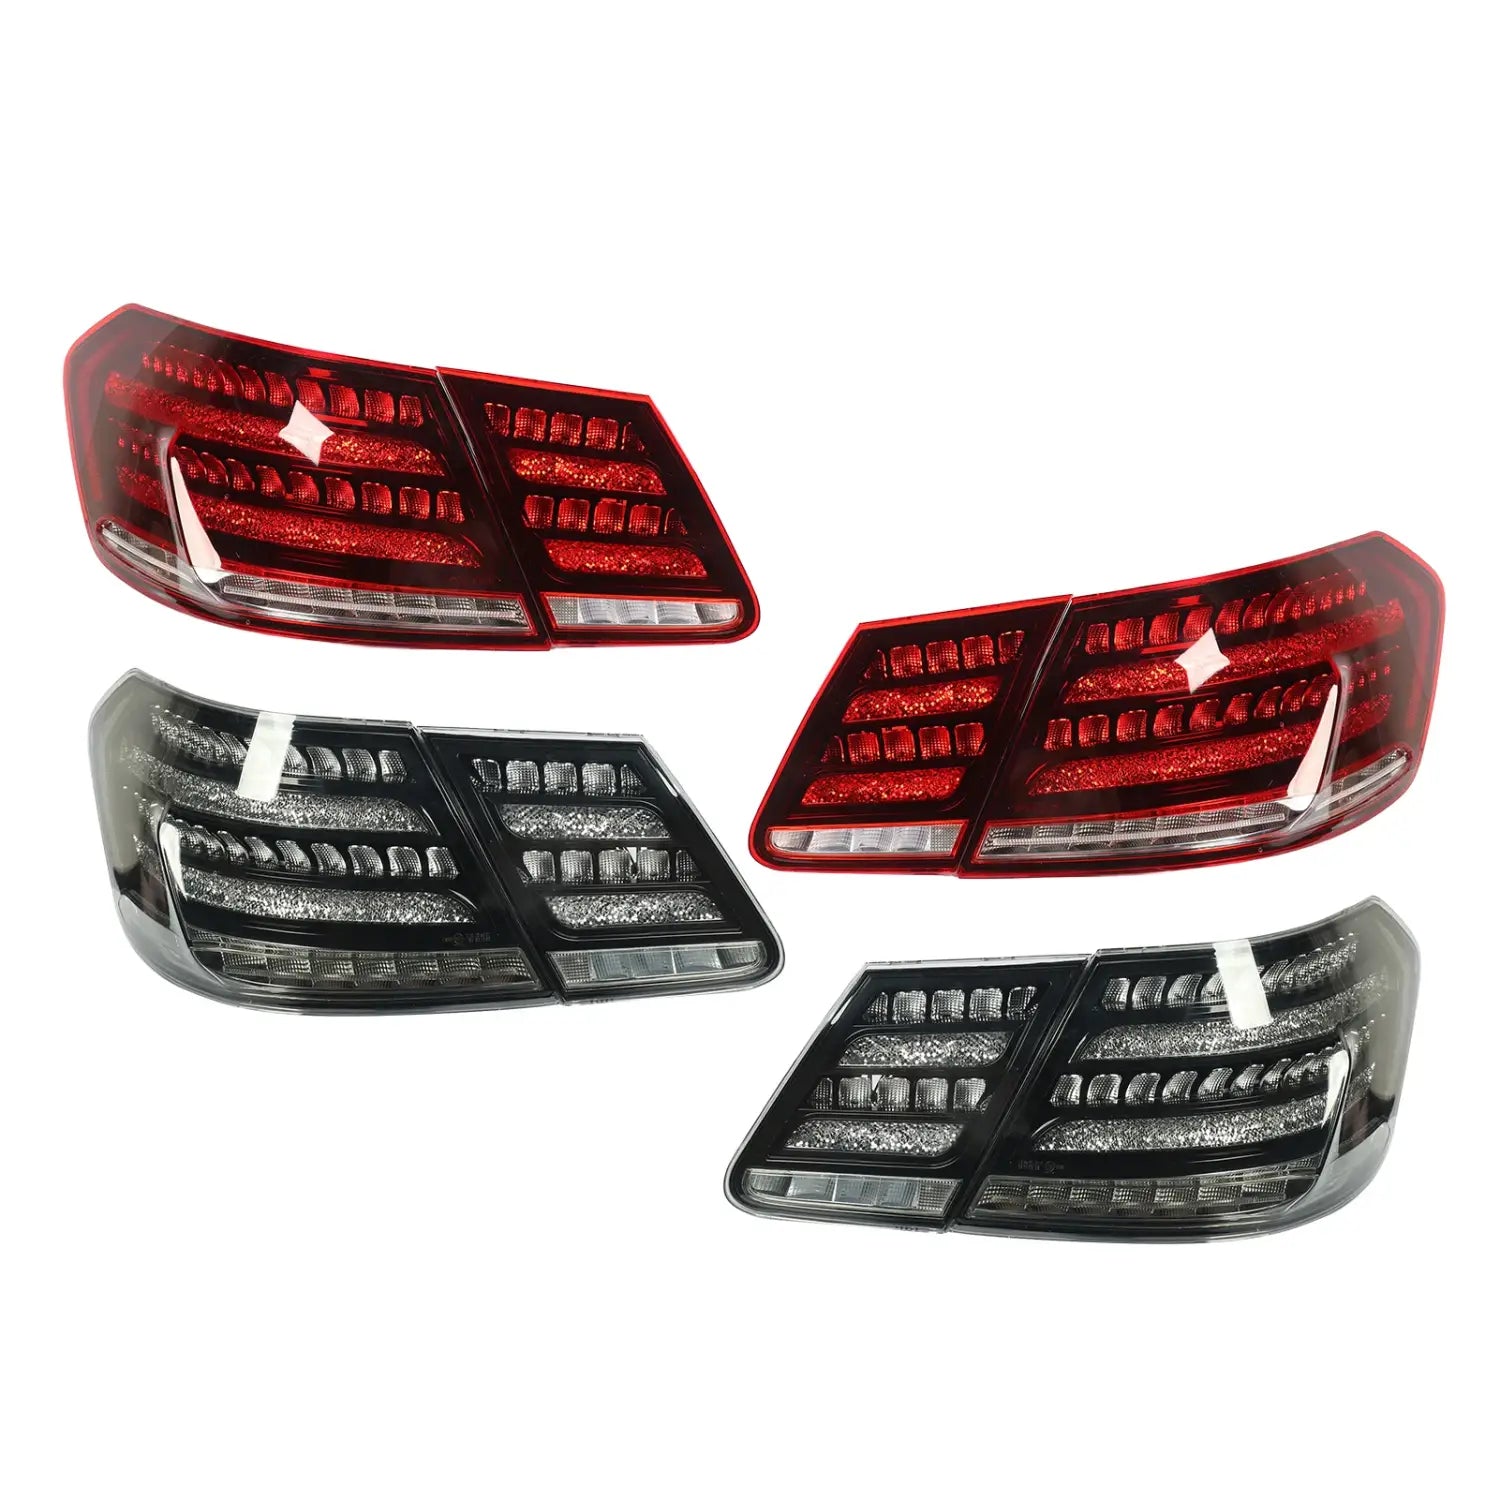 LED Rear Lamp LED Taillights for Maybach LED Tail Light Rear